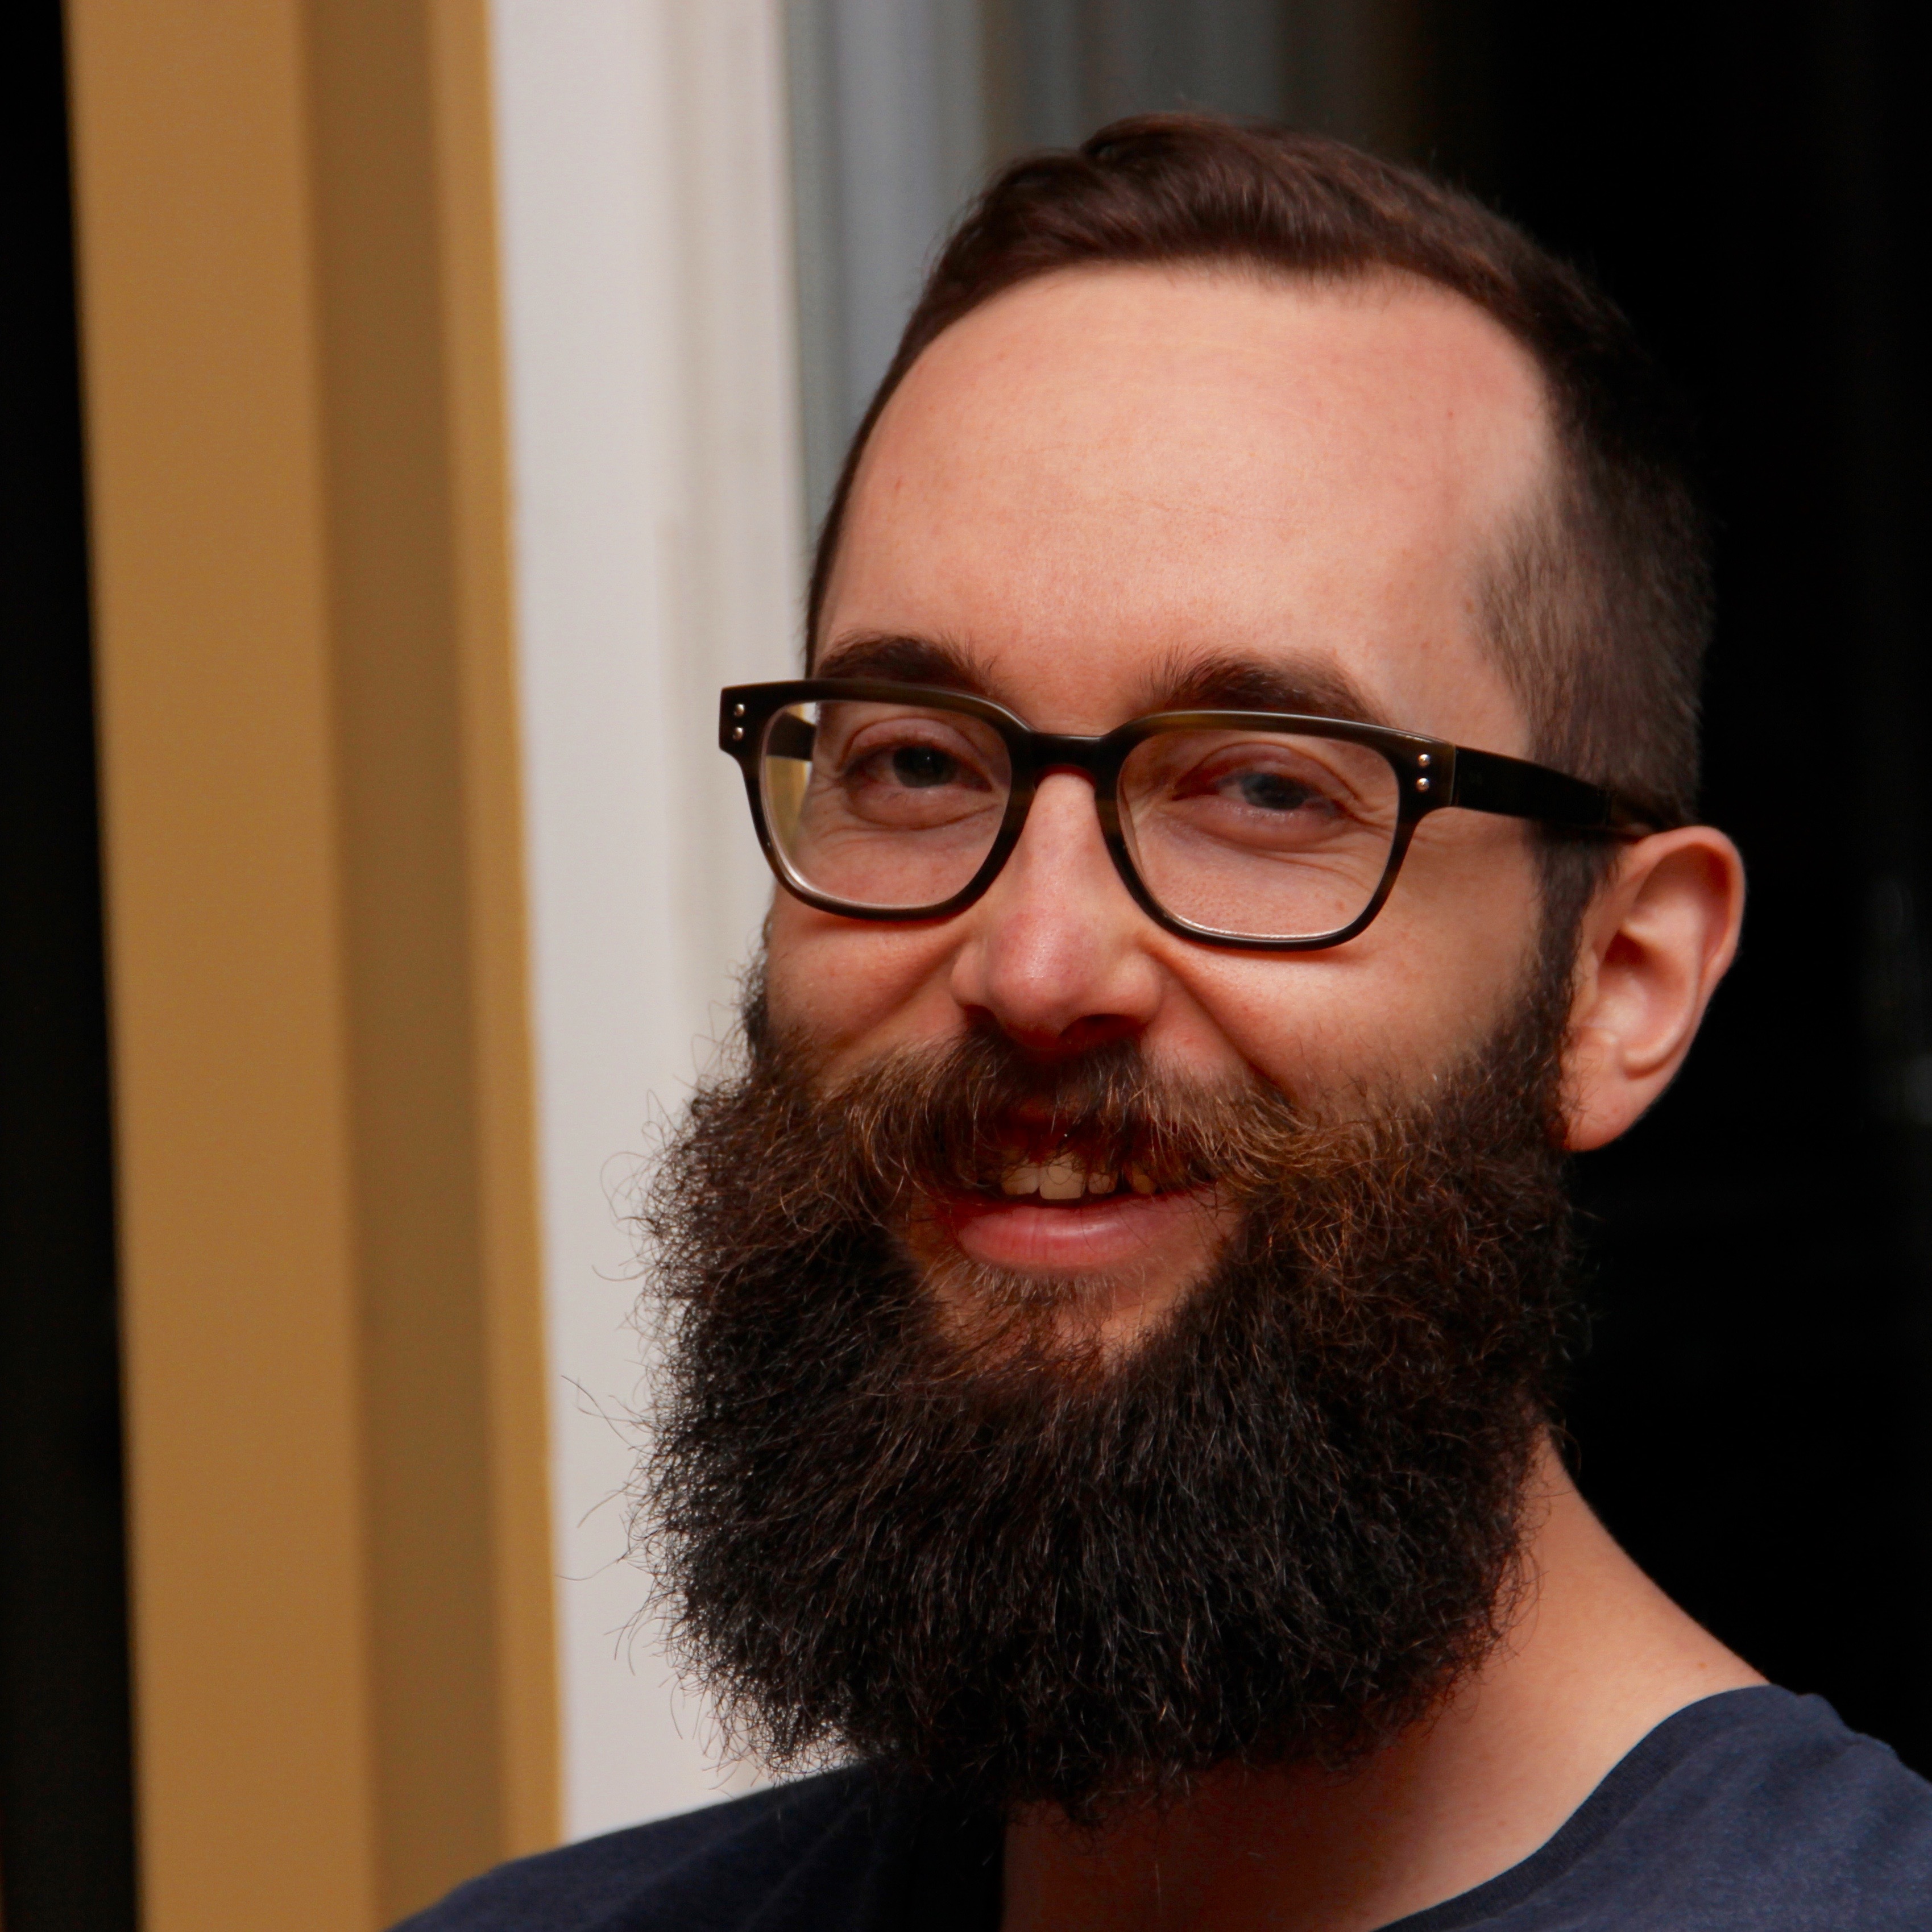 a picture of a bearded white man with glasses, smiling at the camera